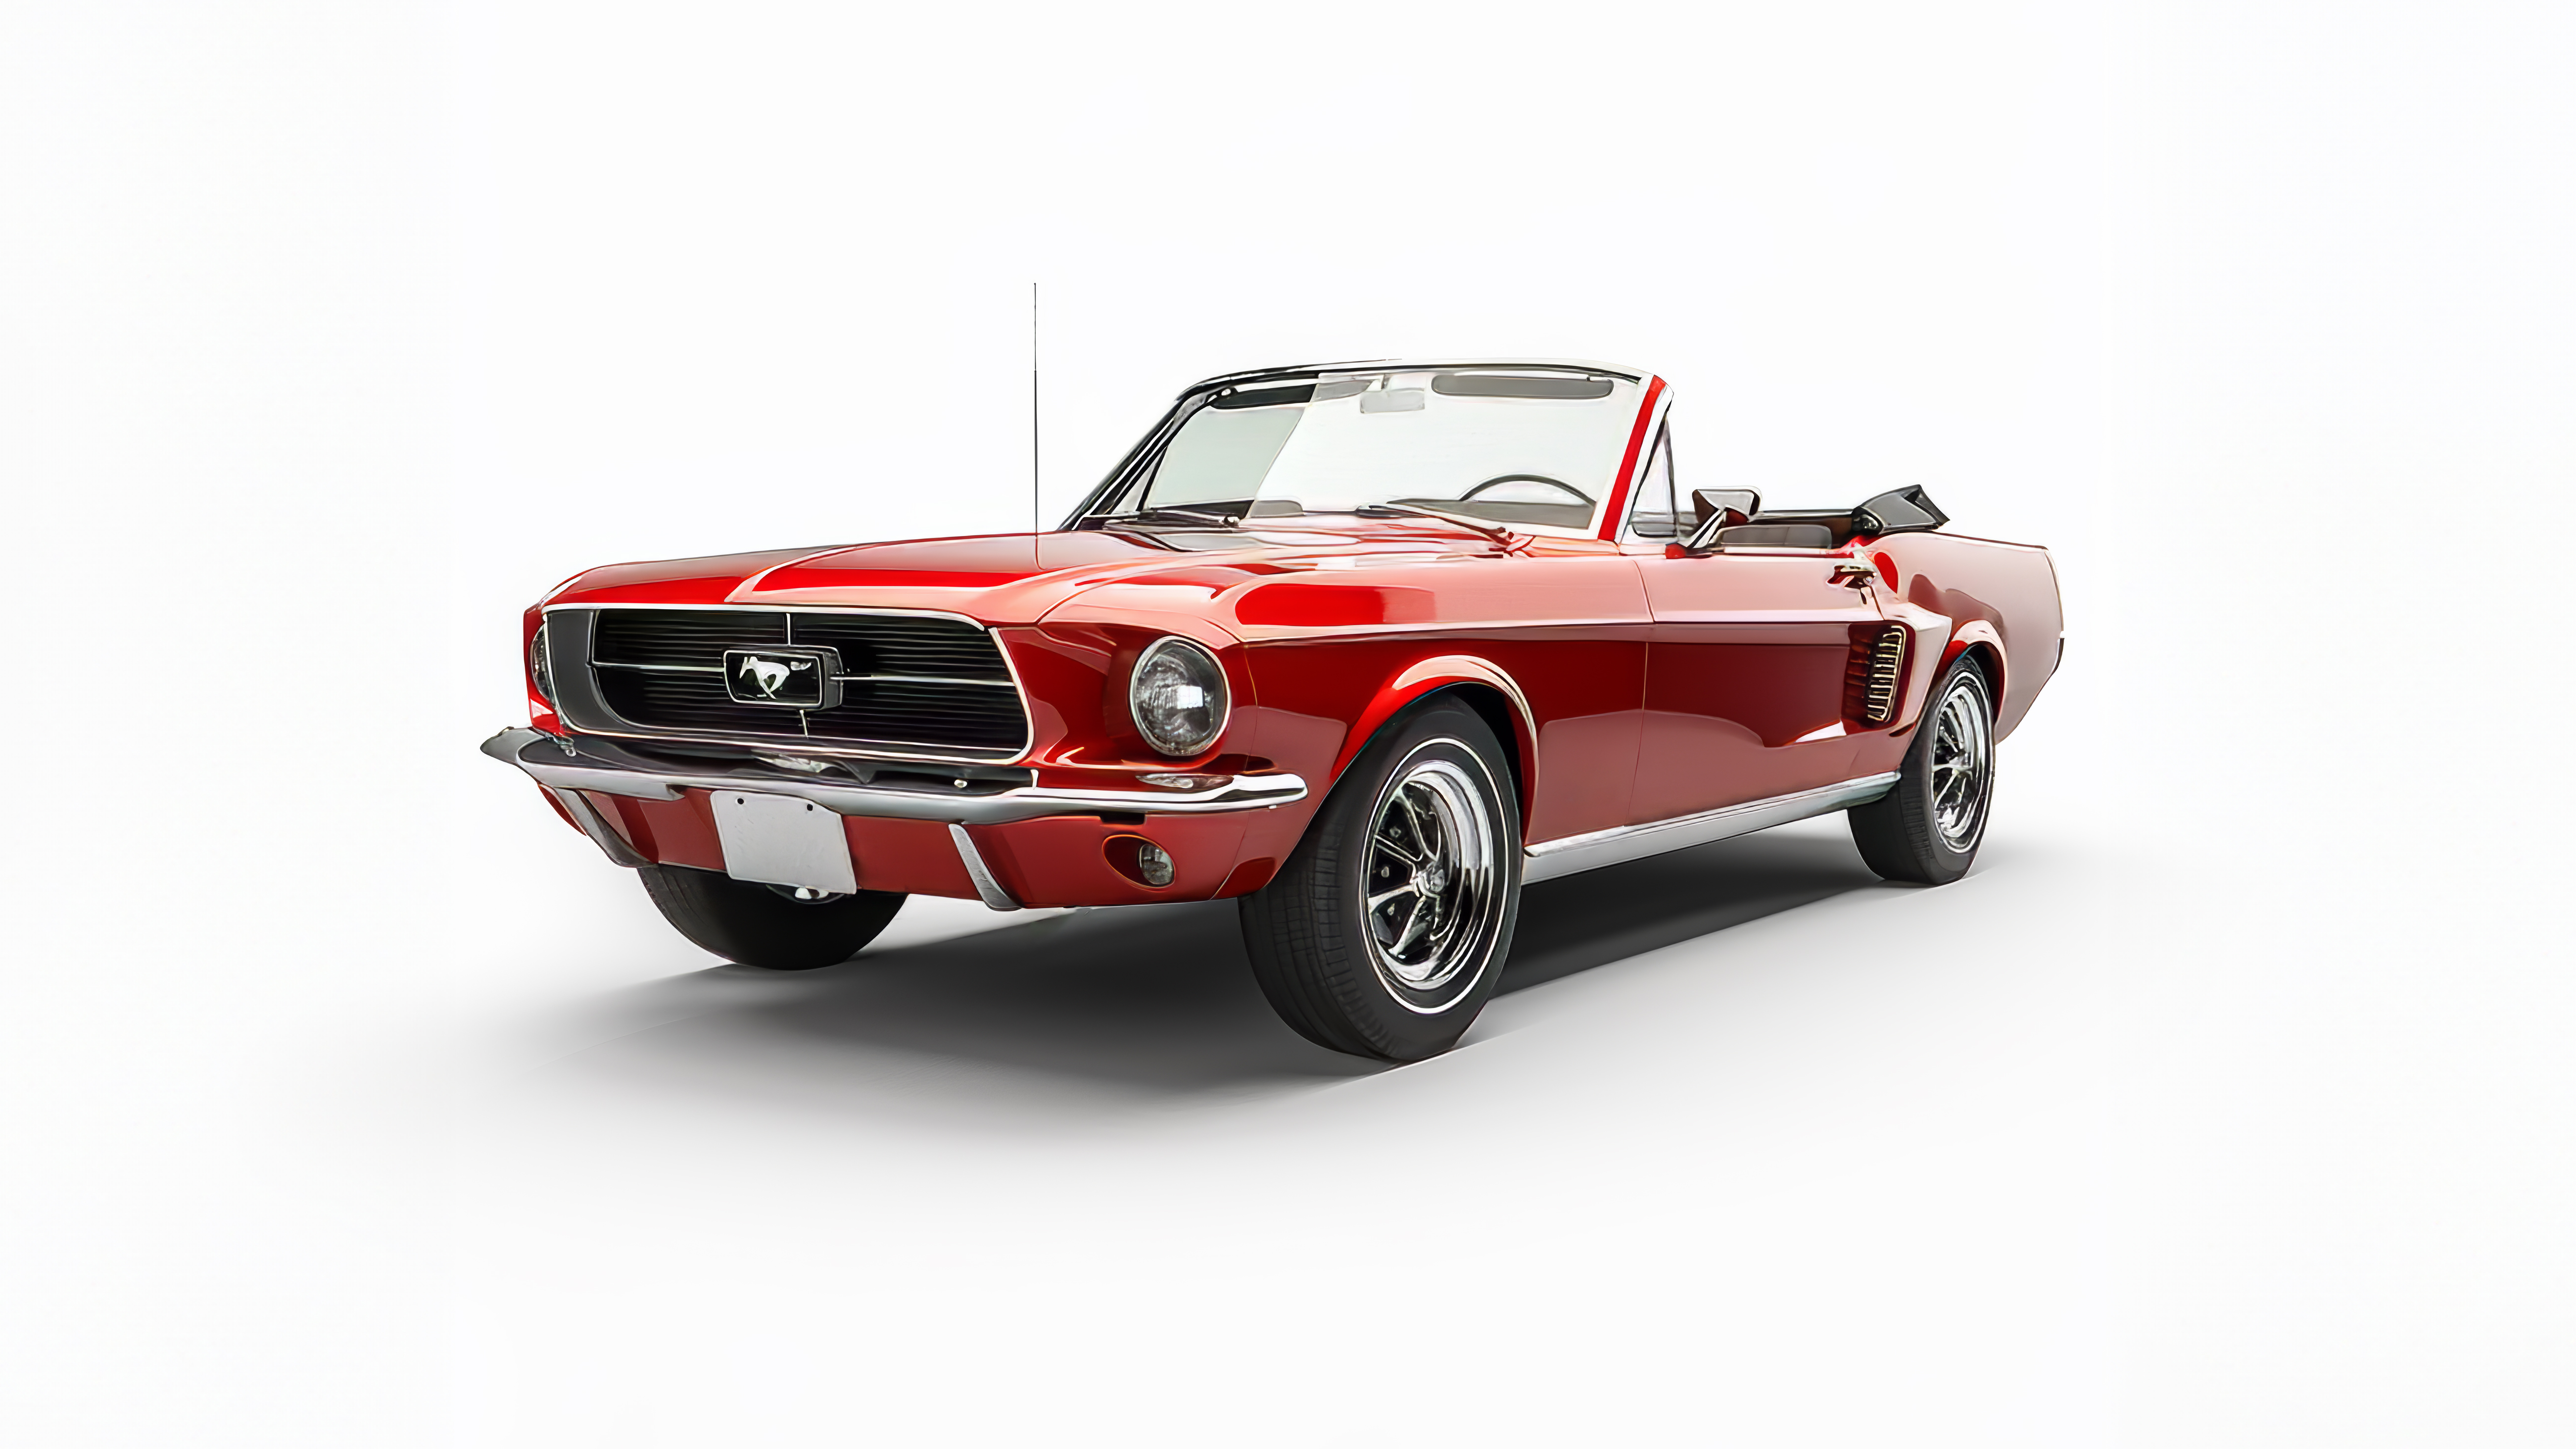 Ford EV Mustang BASE Specifications Model — 1967 – 1968 Mustang Body Style – Fastback or ConvertiblePowertrain – EV 300 HP with Direct DriveCooling – Twin Derale High Performance CoolersBraking – High Performance Regenerative, 6 Caliper Front and 4 Caliper RearSuspension – Front and Rear coilover suspension with G-LinkCharging – DC Fast Charging